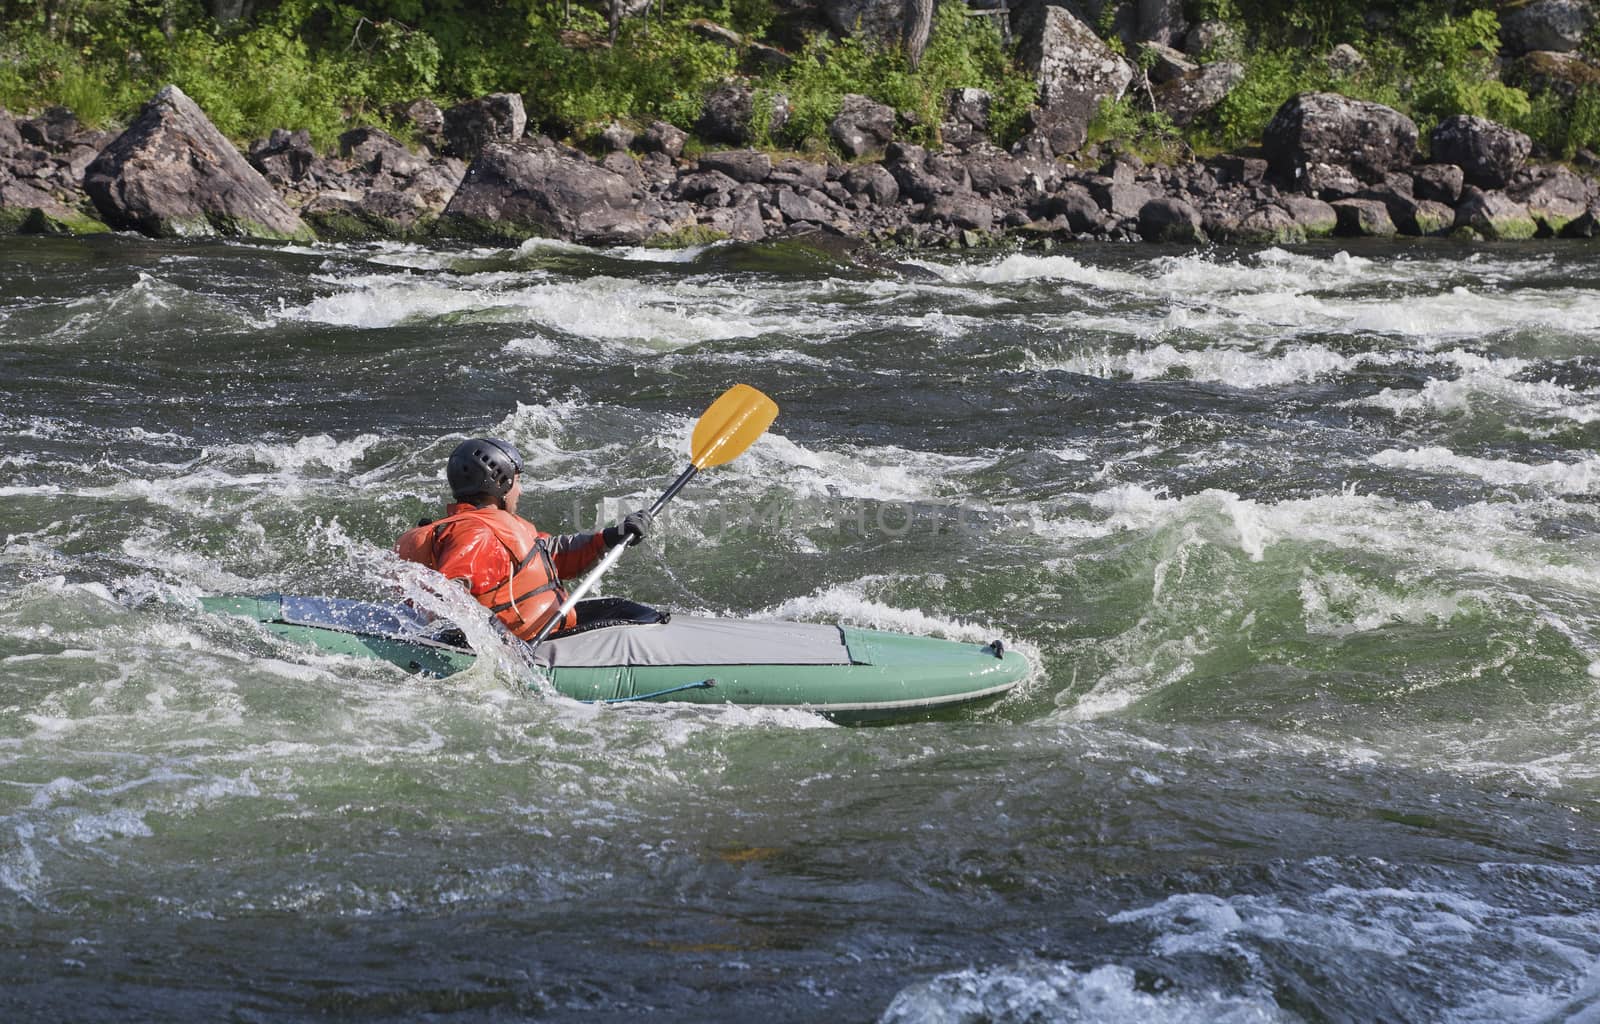 Kayaker in whitewater by Goodday